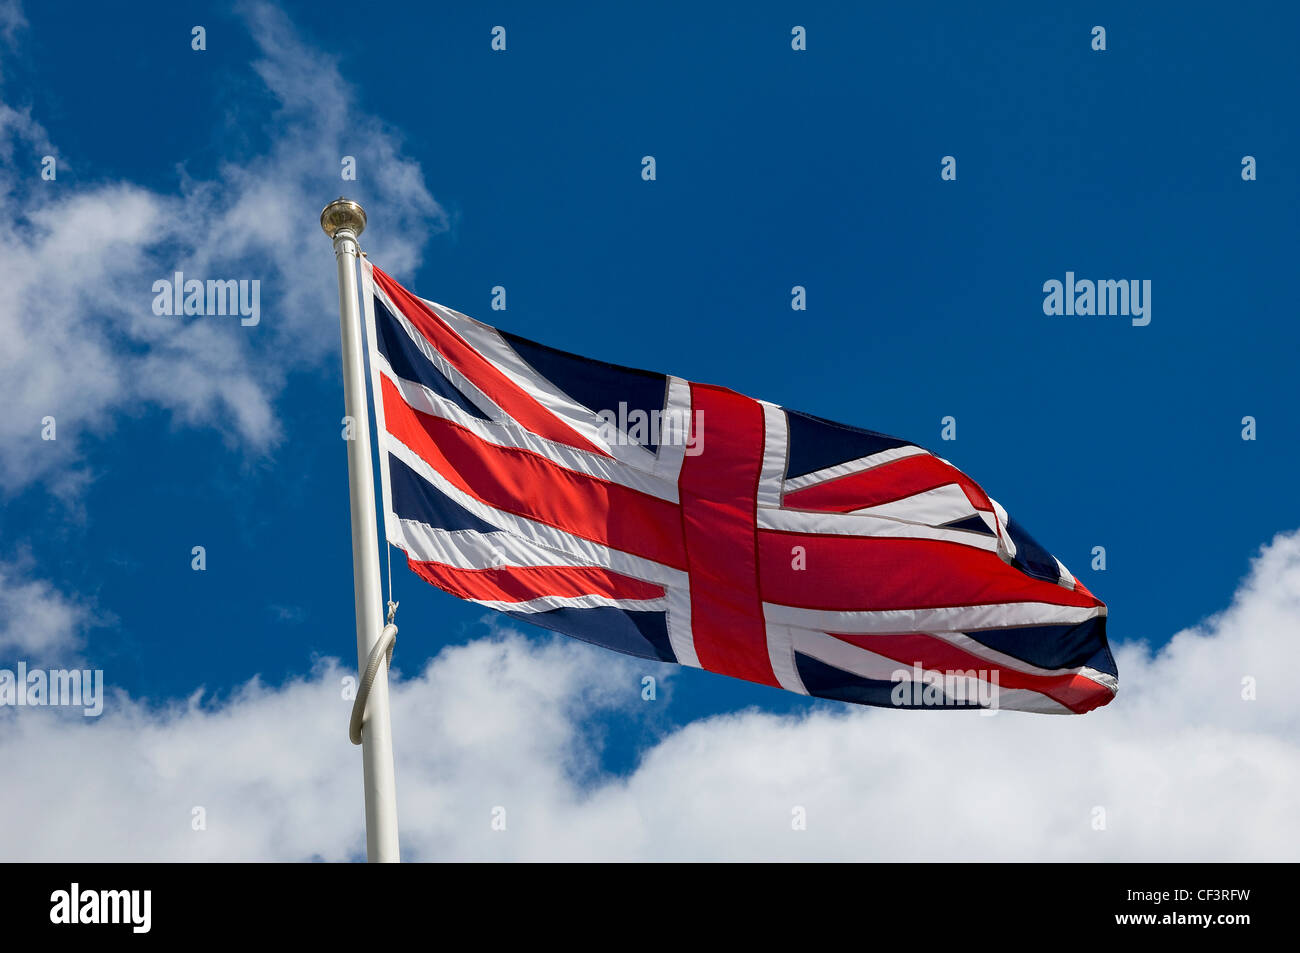 A union flag on a flagpole fluttering in the breeze against a blue sky. Stock Photo